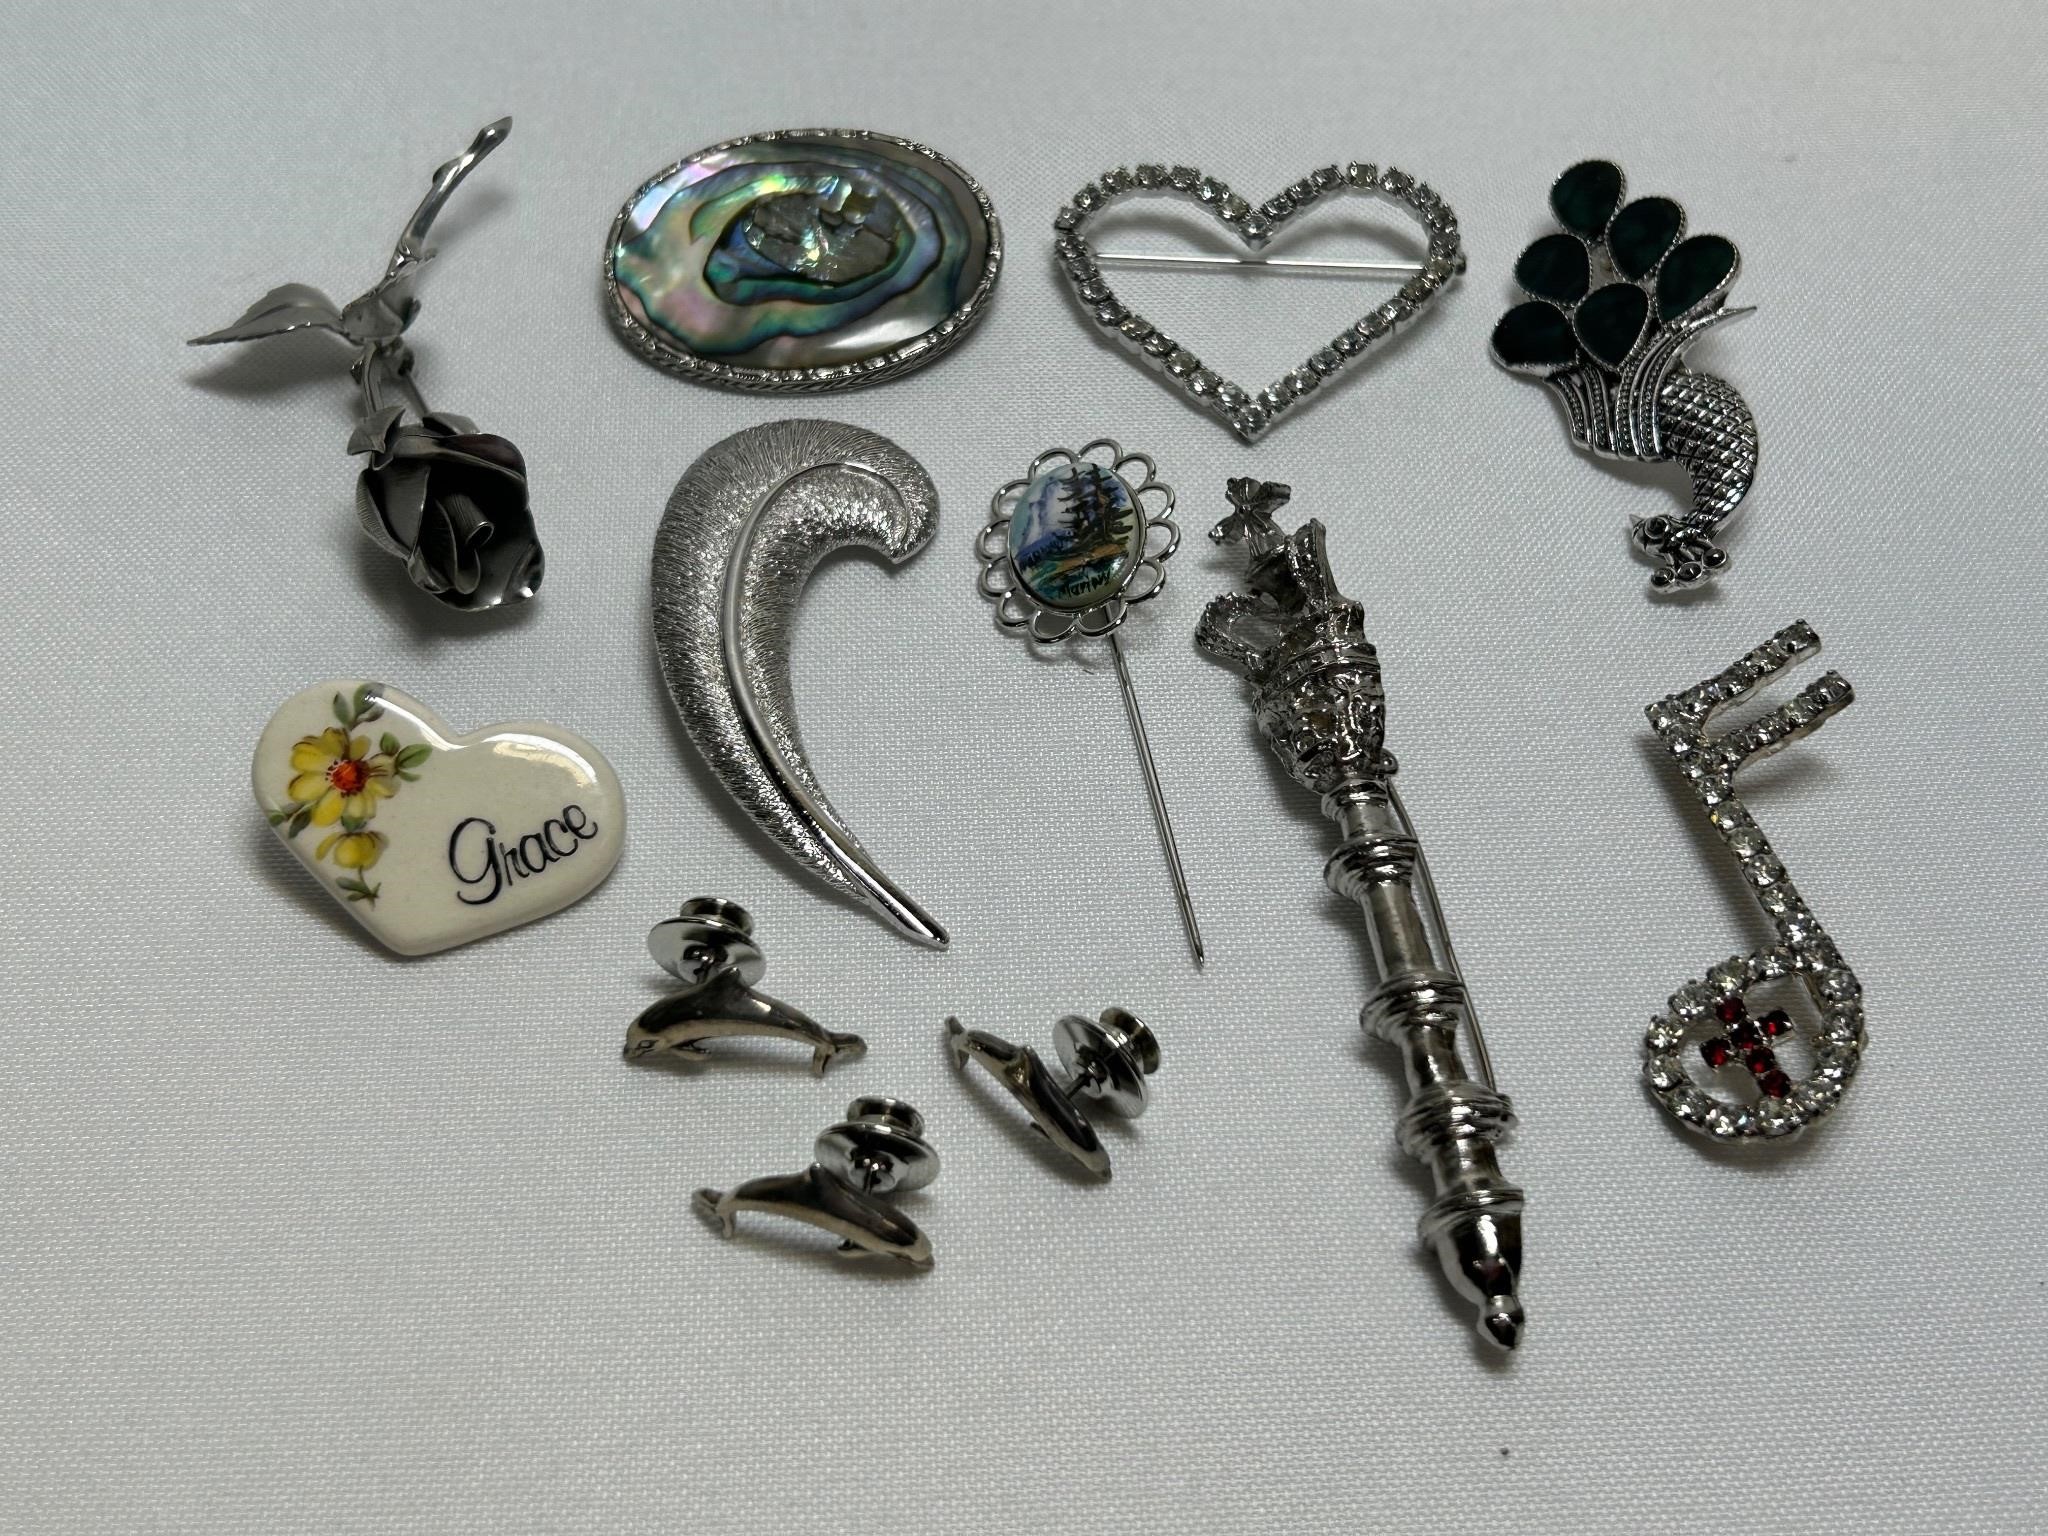 8 Silver Tone Pins, Dolphins, Heart, Grace